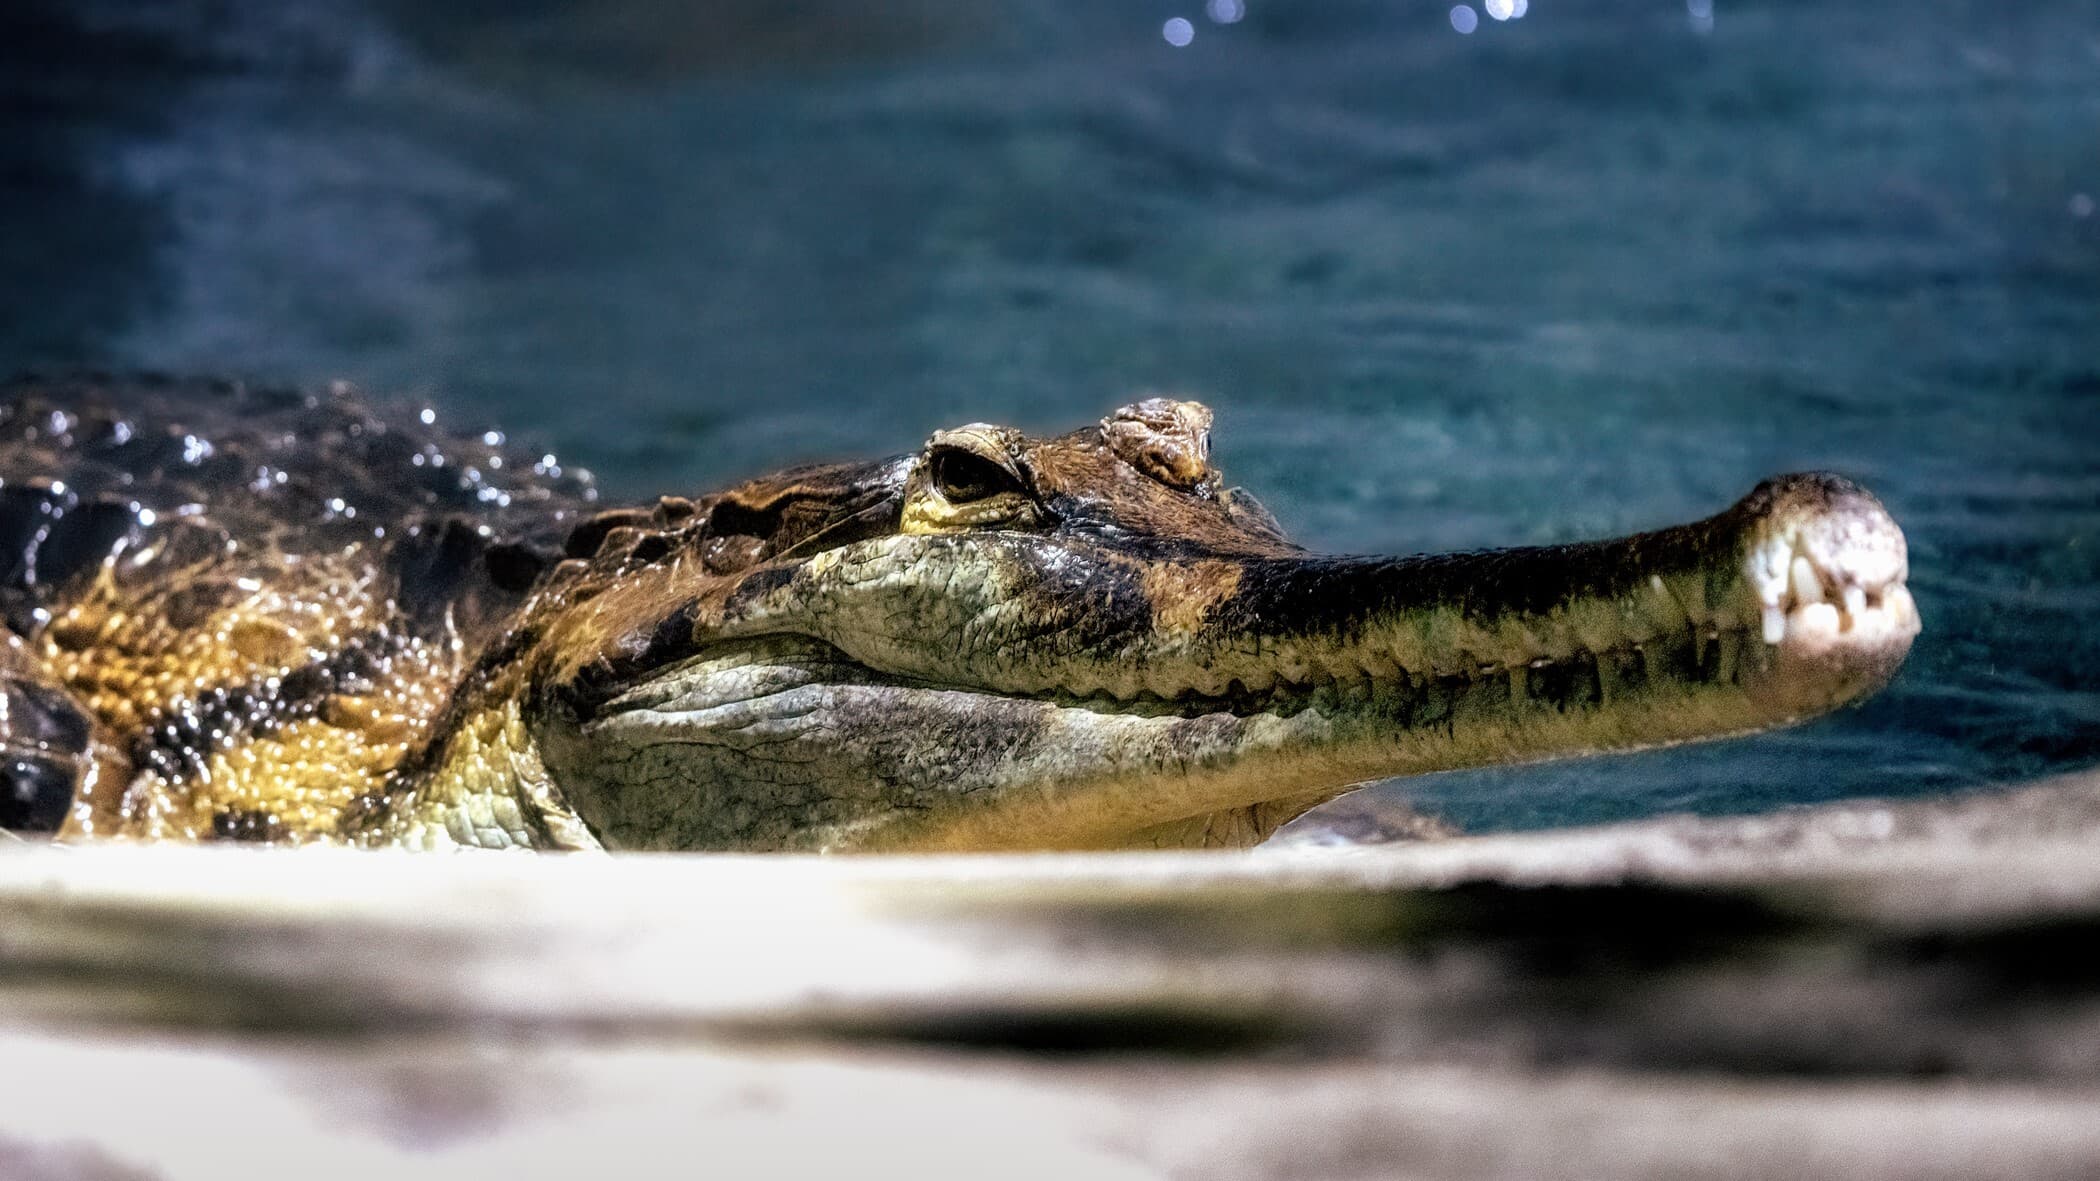 A Tomistoma at the Virginia Aquarium gazes up towards the camera from beside the water in its habitat